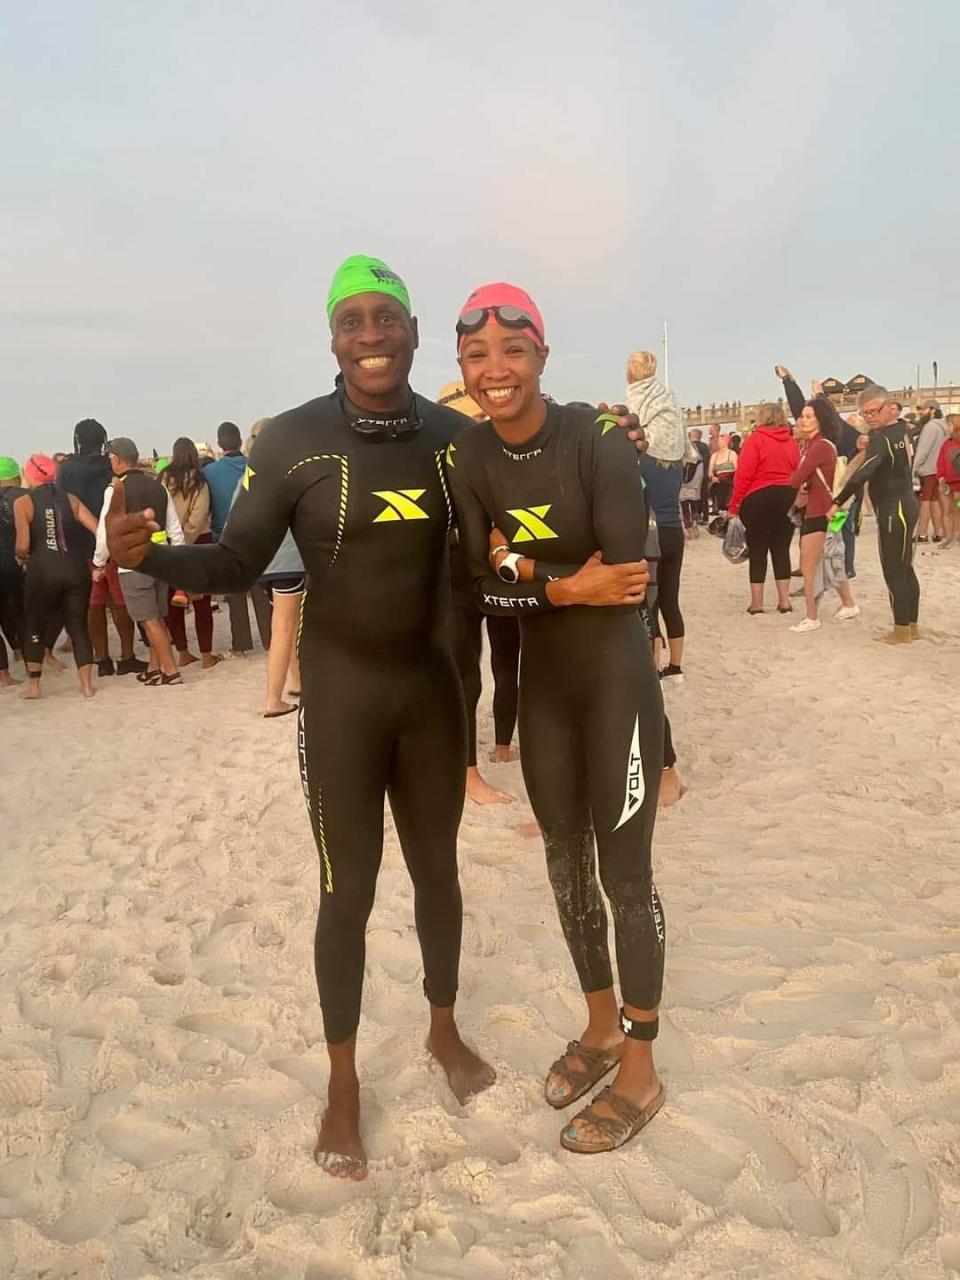 Clement Allen and daughter Jamila Allen have been competing together in triathlons, marathons and road races since 2009 after making a New Year's resolution.